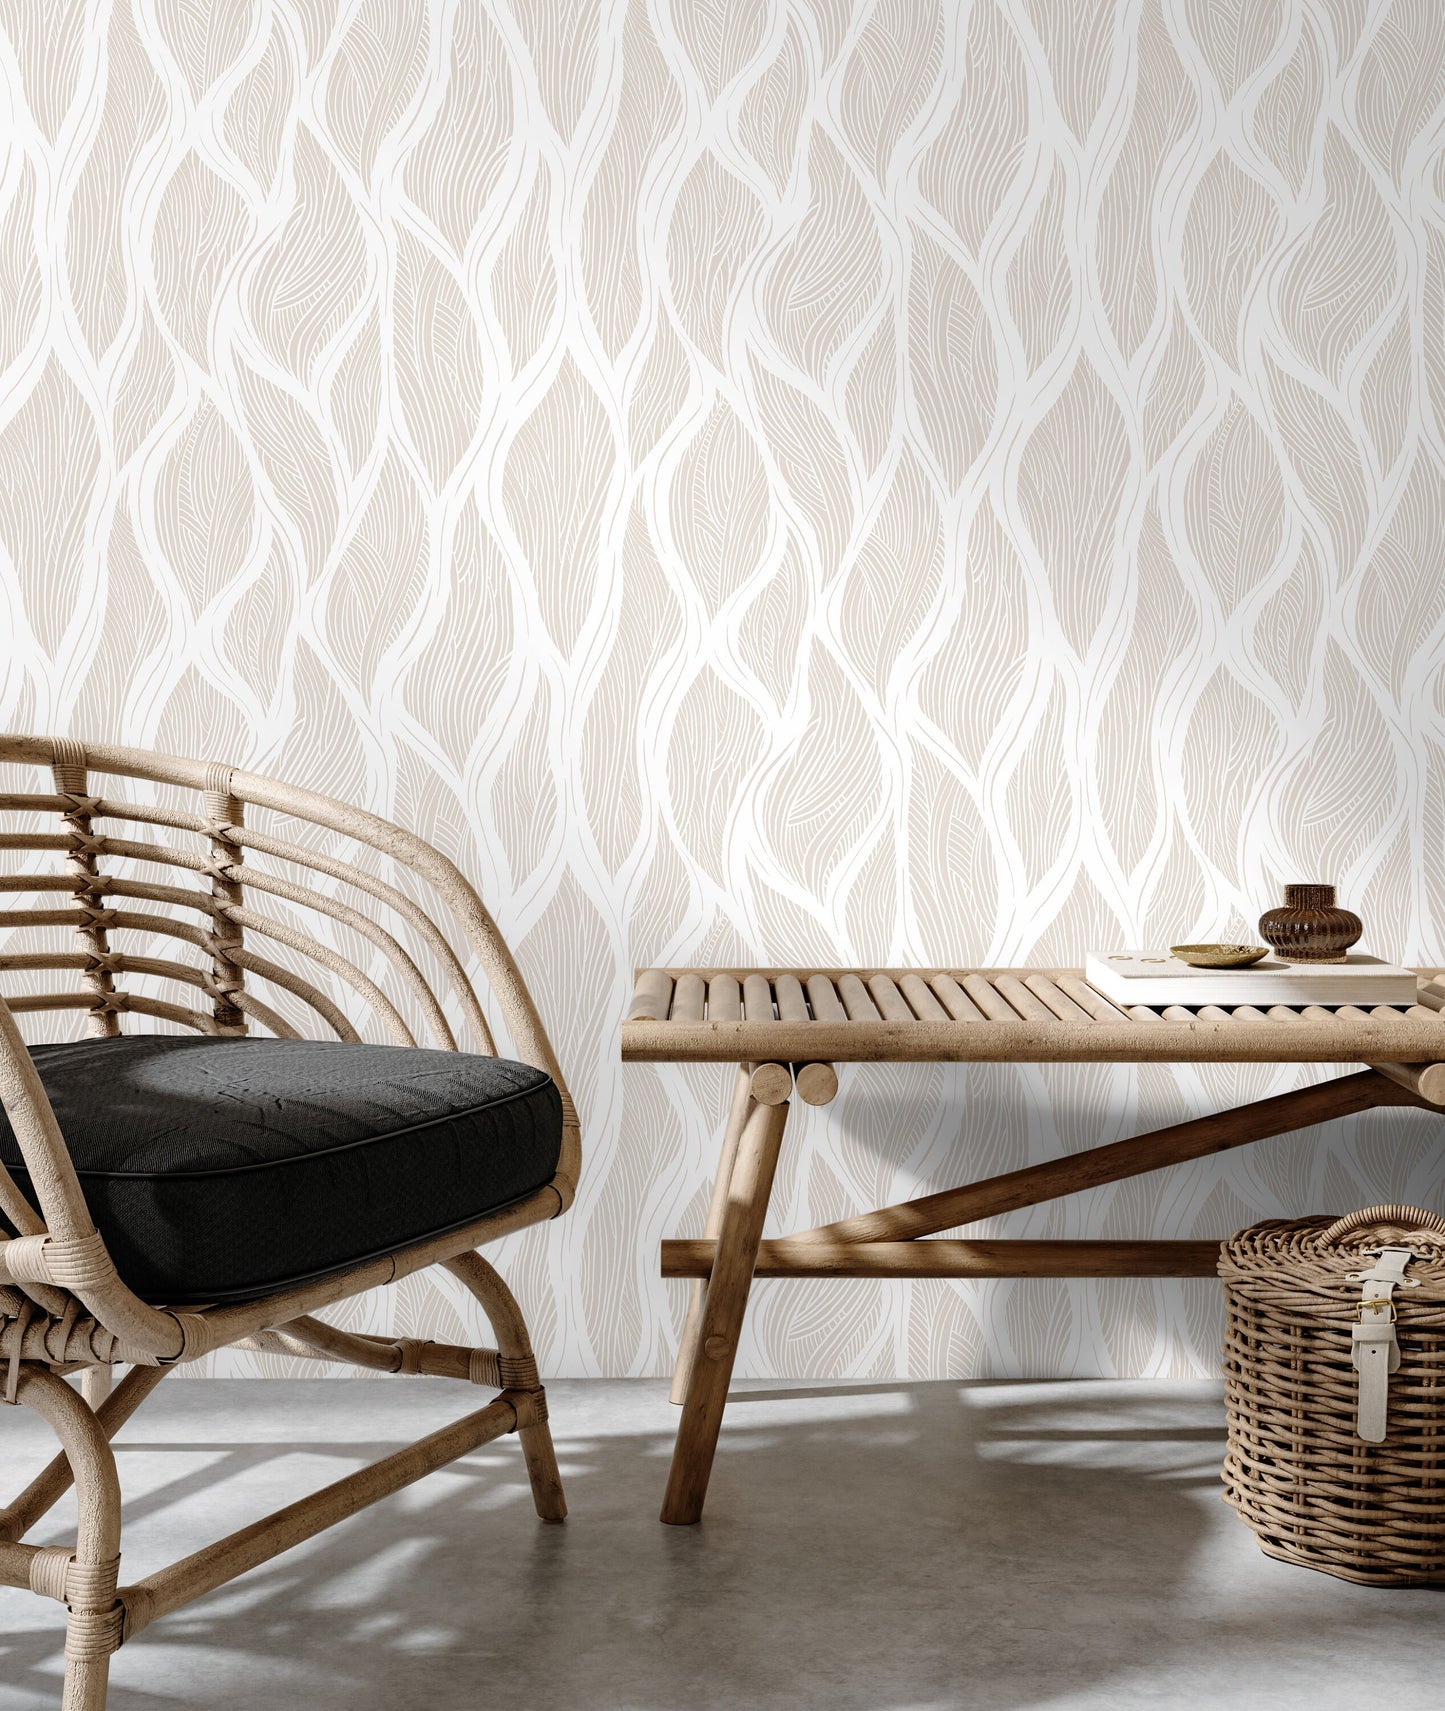 Beige Abstract Leaf Wallpaper / Peel and Stick Wallpaper Removable Wallpaper Home Decor Wall Art Wall Decor Room Decor - C627